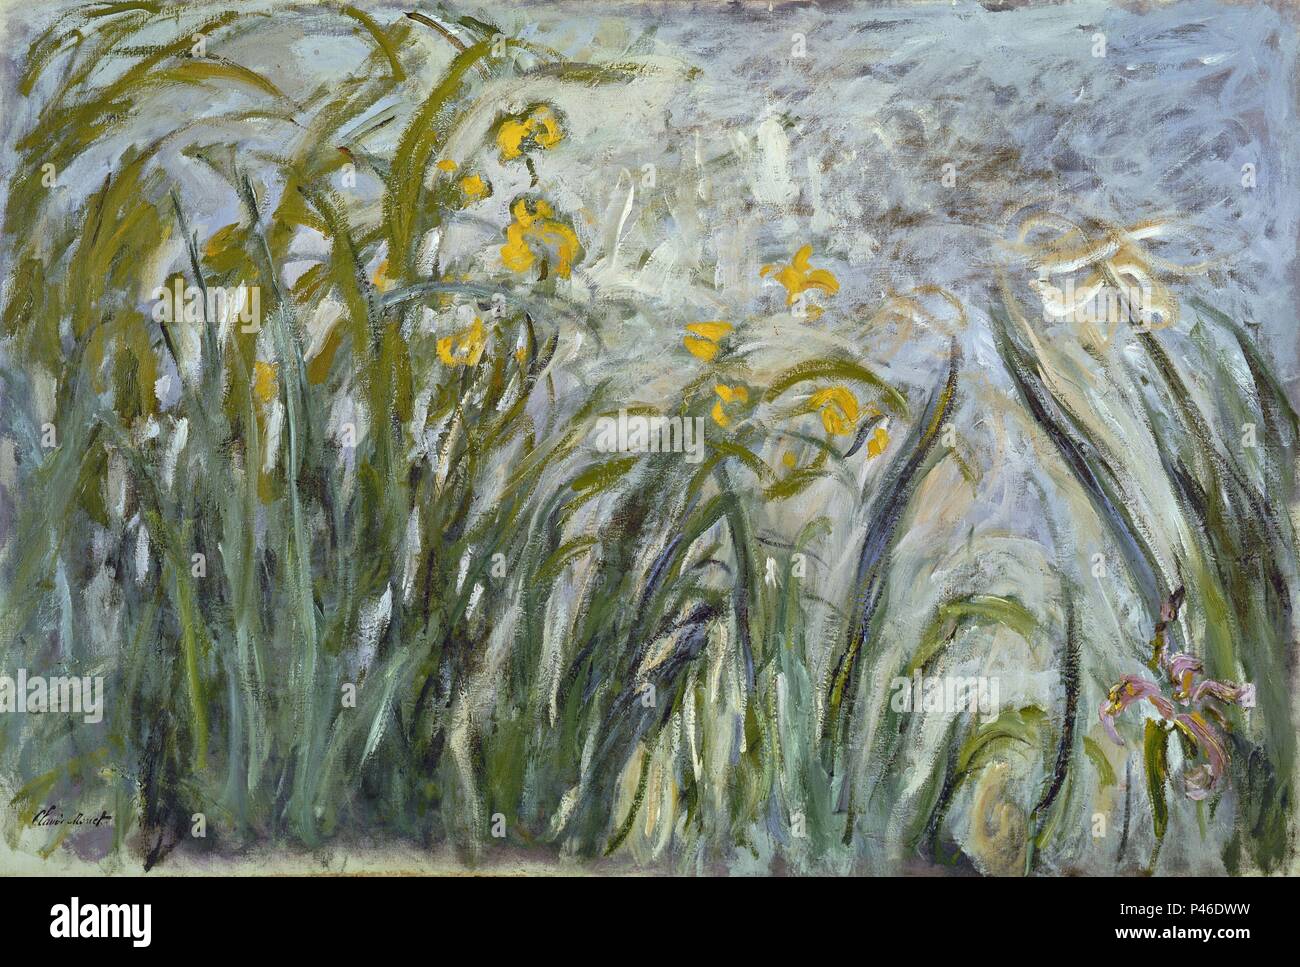 Yellow and Purple Irises - 1924/25 - 106x155 cm - oil on canvas. Author: Claude Monet (1840-1926). Location: MUSEO MARMOTTAN, FRANCE. Also known as: LOS IRIS JOVENES DE GIVERNY. Stock Photo